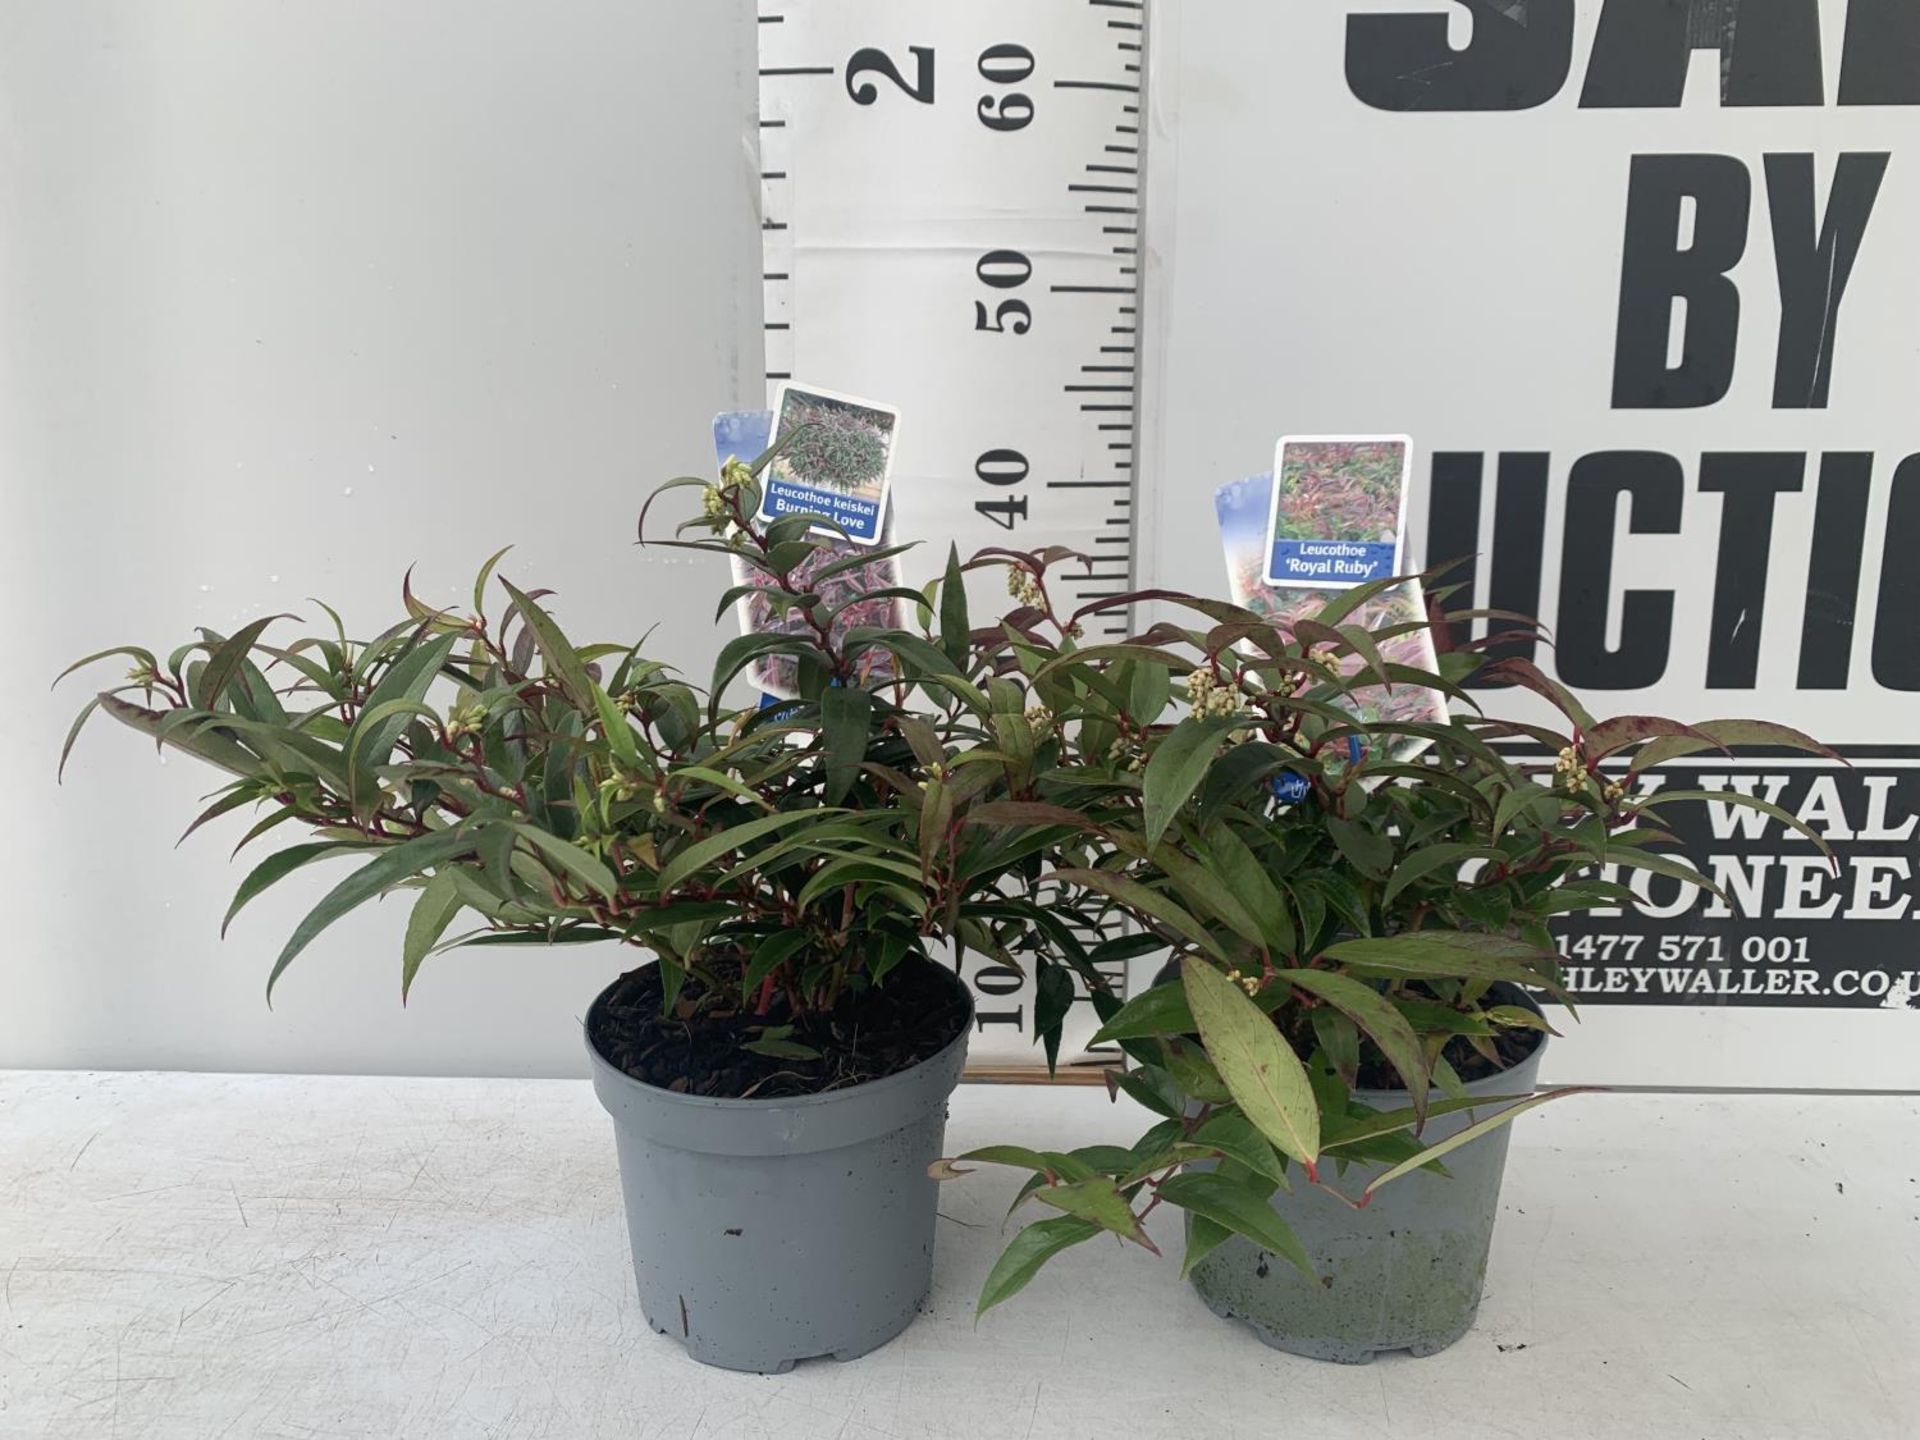 TWO LEUCOTHOE 'ROYAL RUBY' AND 'BURNING LOVE' IN 2 LTR POTS 35CM TALL PLUS VAT TO BE SOLD FOR THE